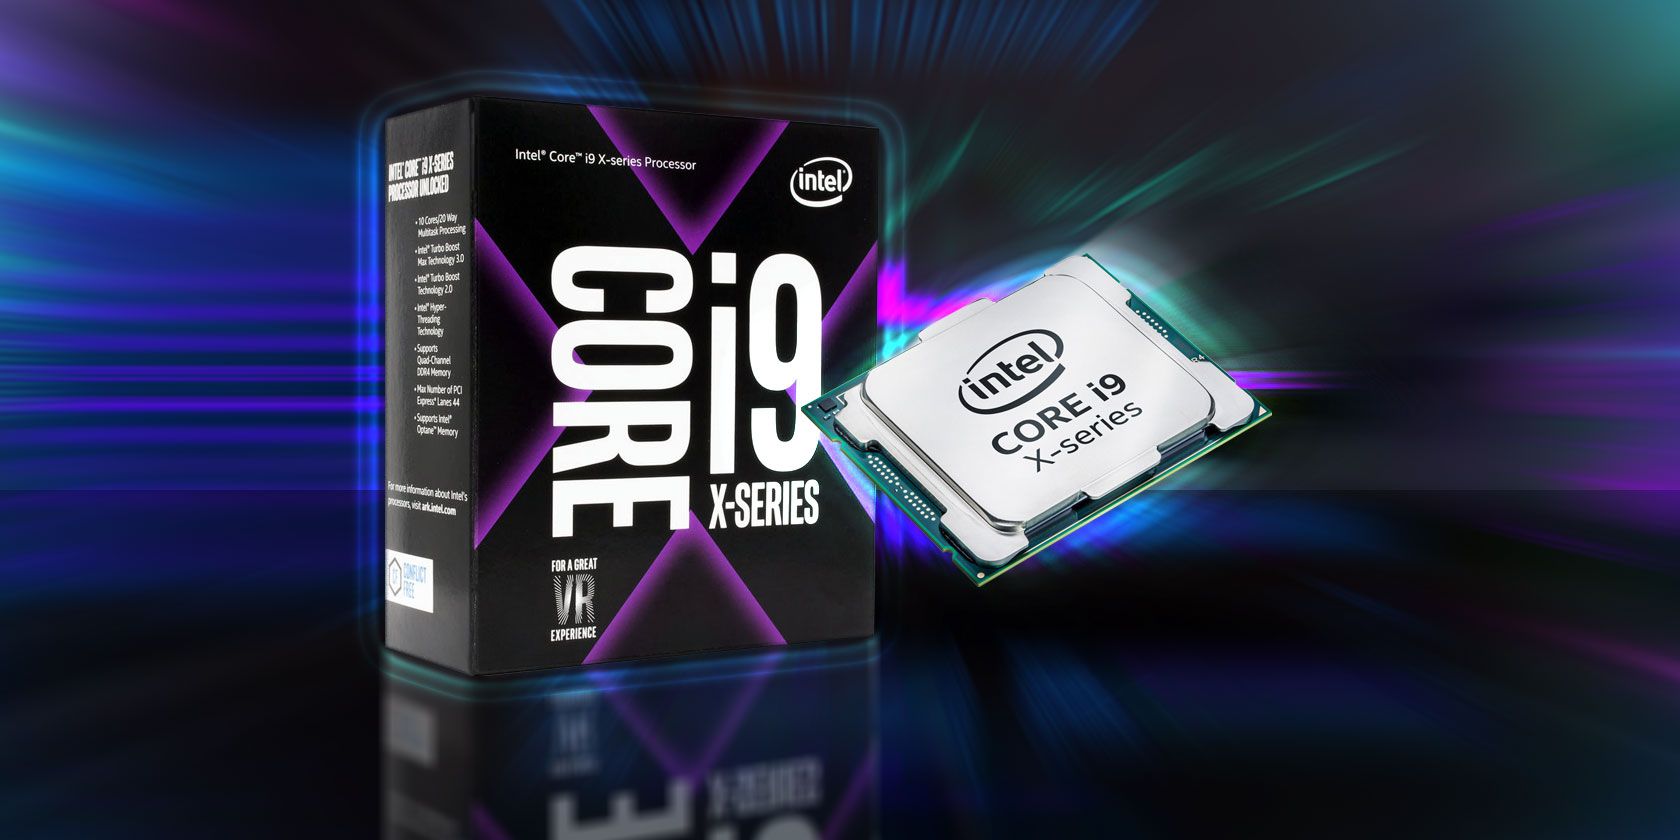 What Makes The Intel Core I9 The Fastest Processor And Should You Buy It